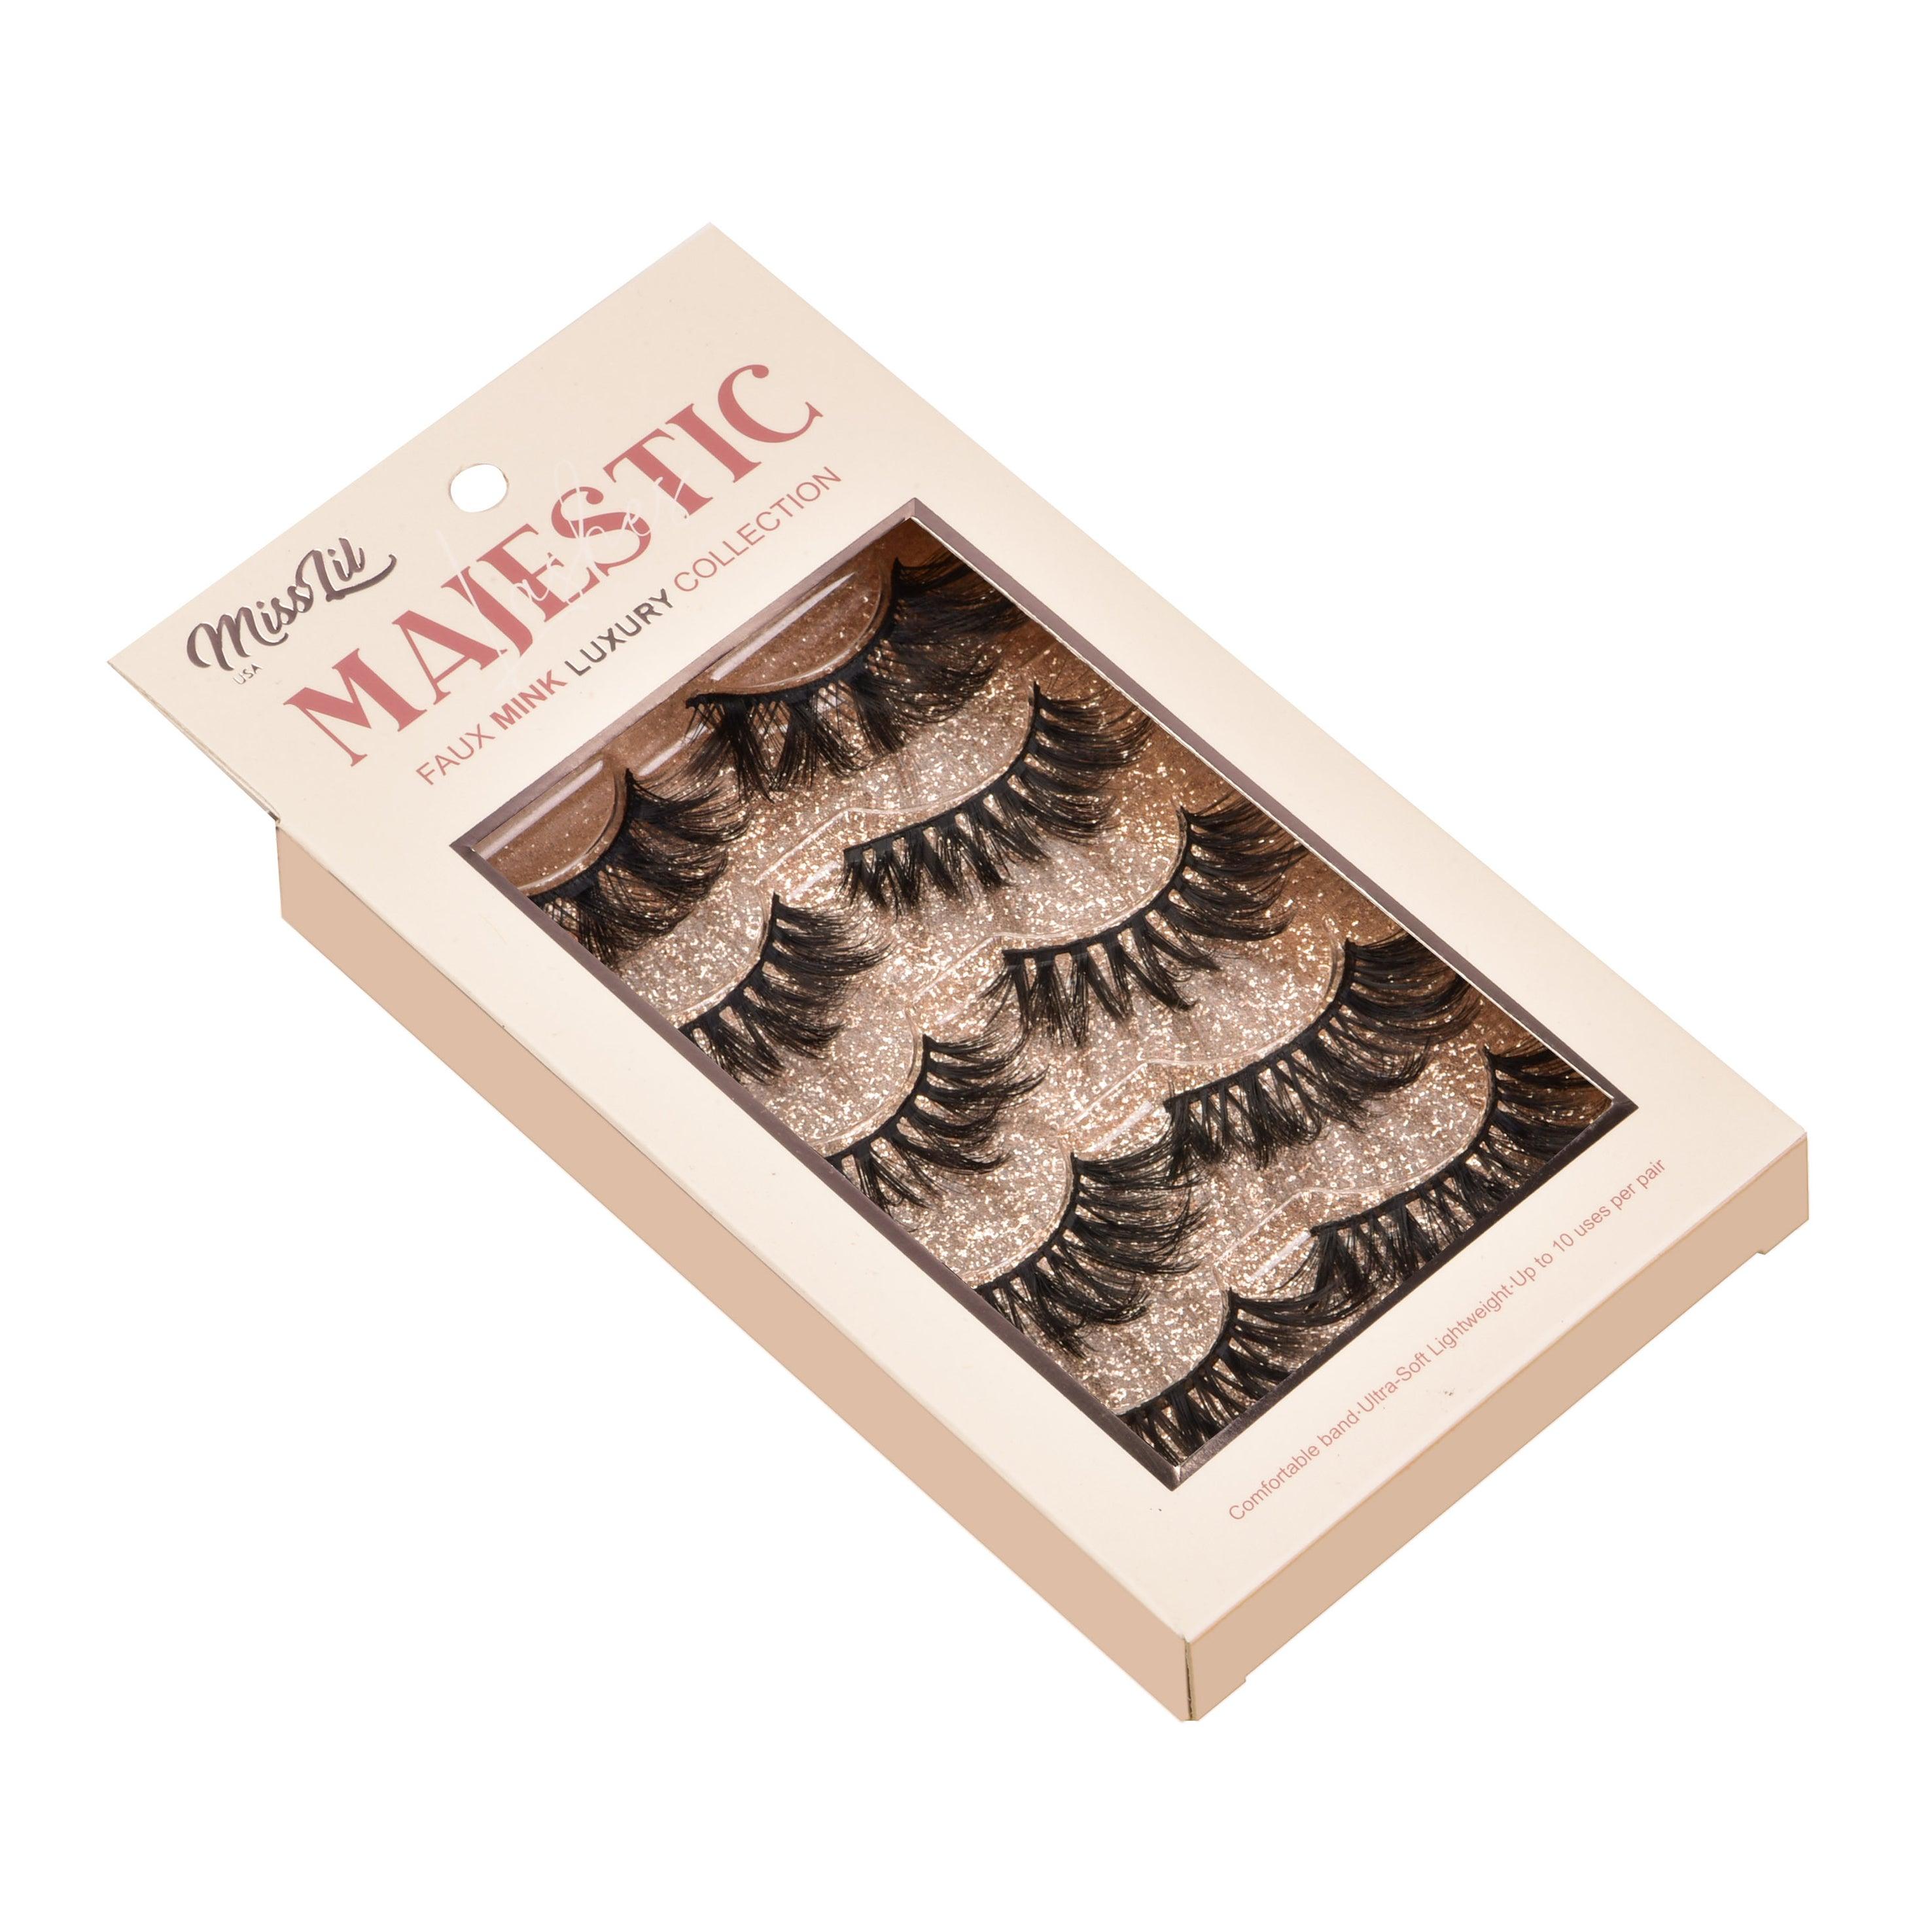 Majestic Collection 5 pairs #1 ( Pack of 6) - Miss Lil USA